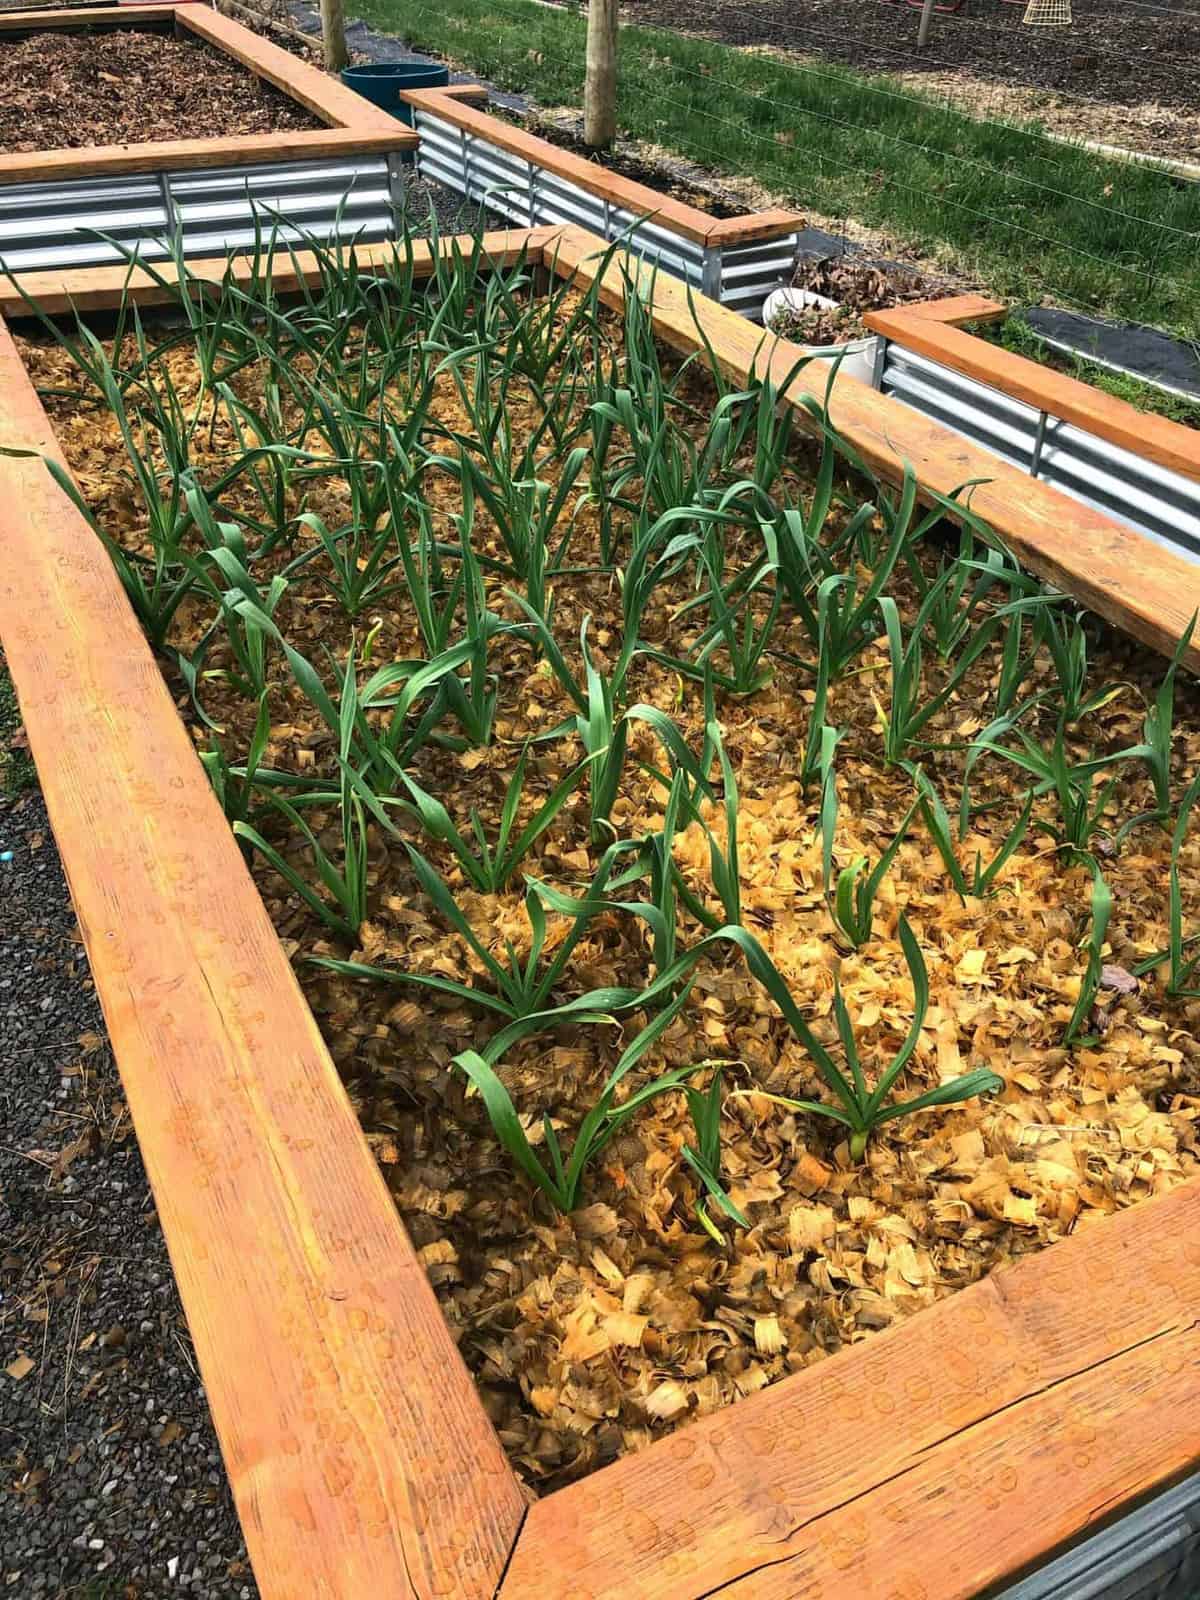 A raised garden bed filled with green garlic plants.